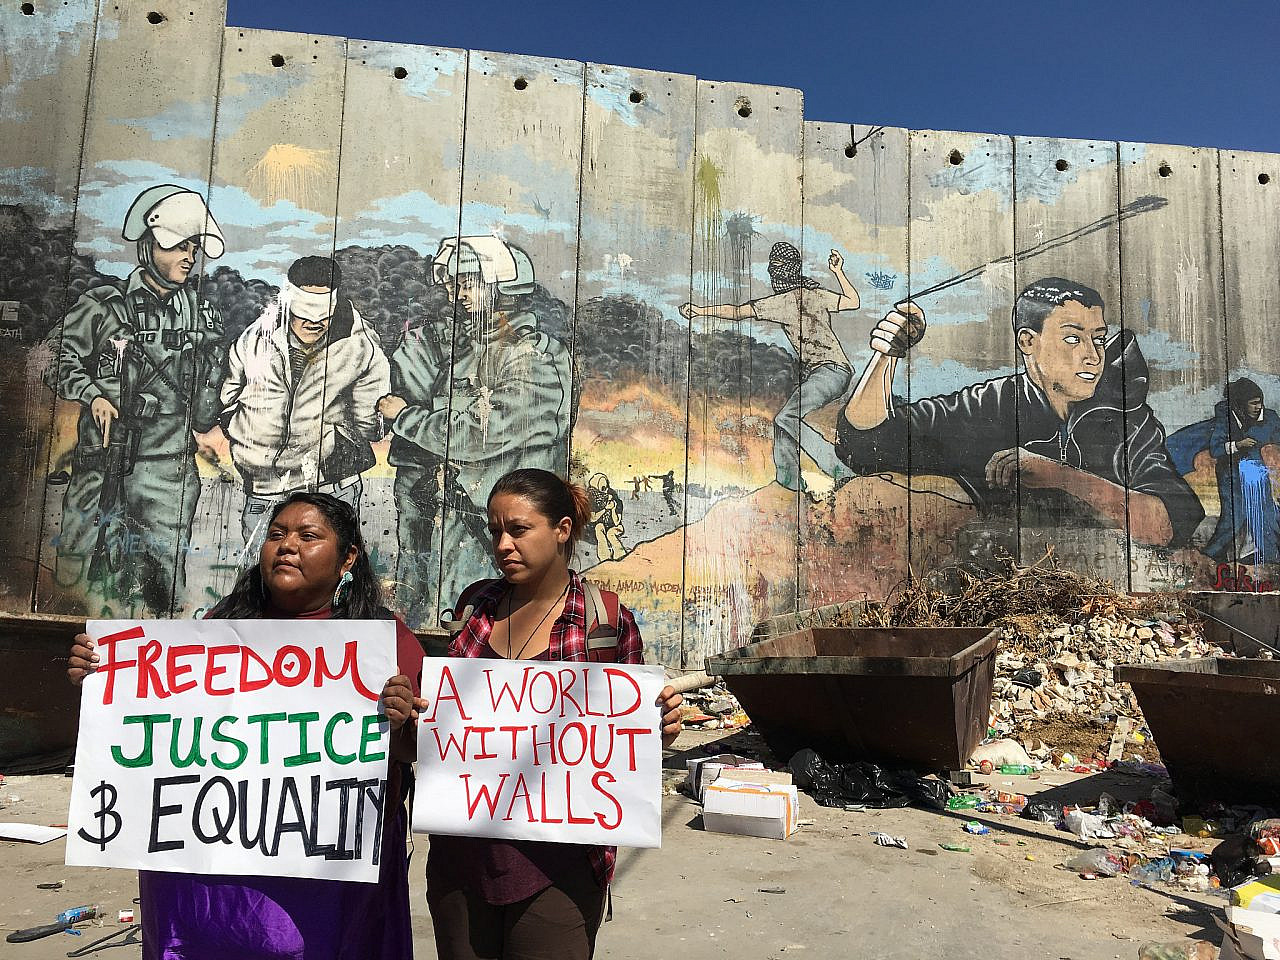 Activists with the U.S. Campaign for Palestinian Rights hold signs in front of Israel's separation wall in the West Bank. (Courtesy of USCPR)